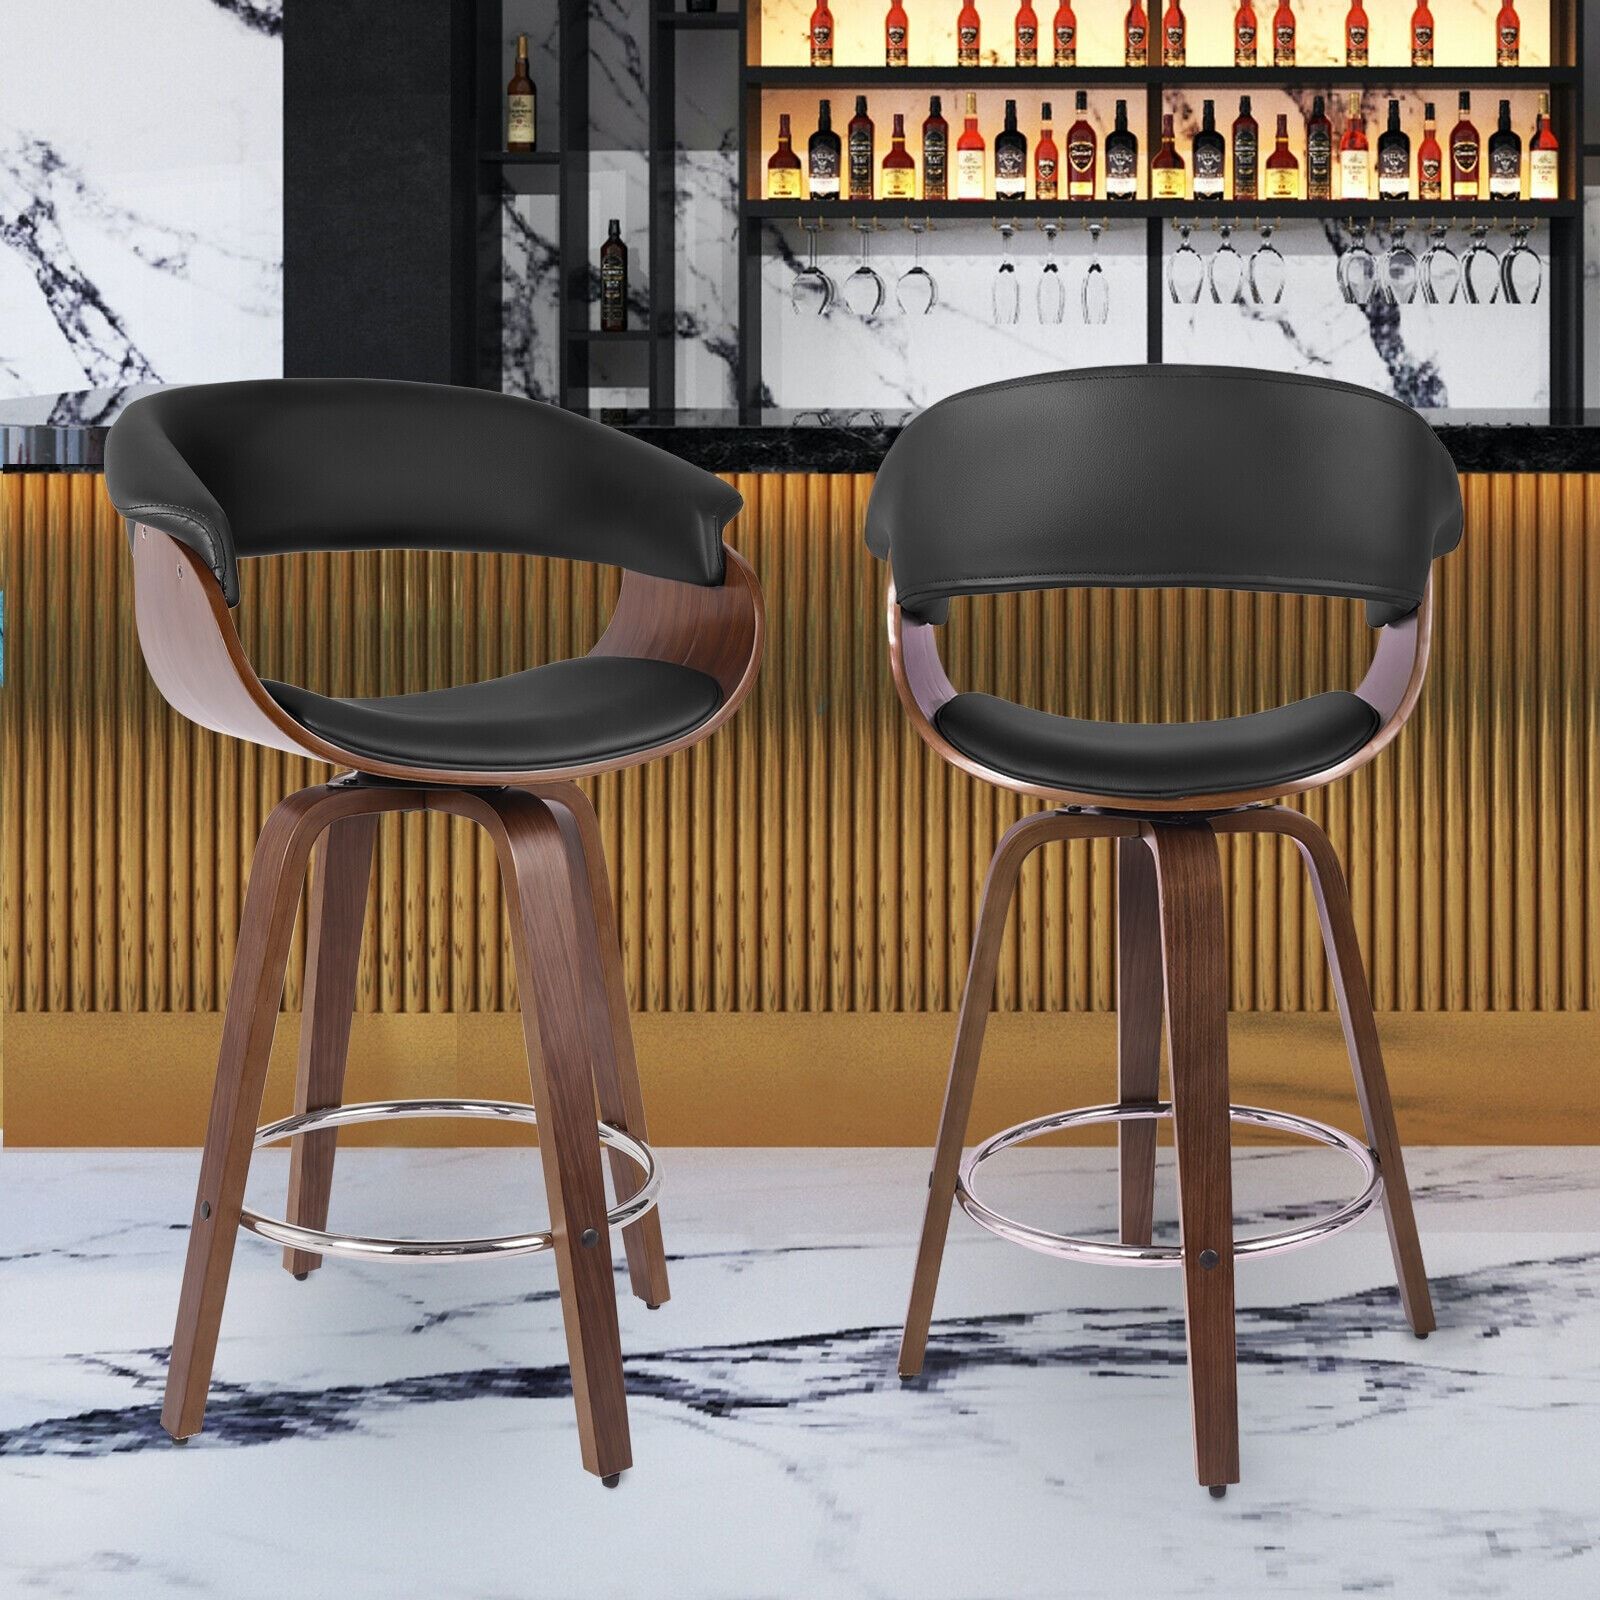 Ultimate Comfort: Swivel Bar Stools With Back And Arms for a Stylish and Relaxing Experience